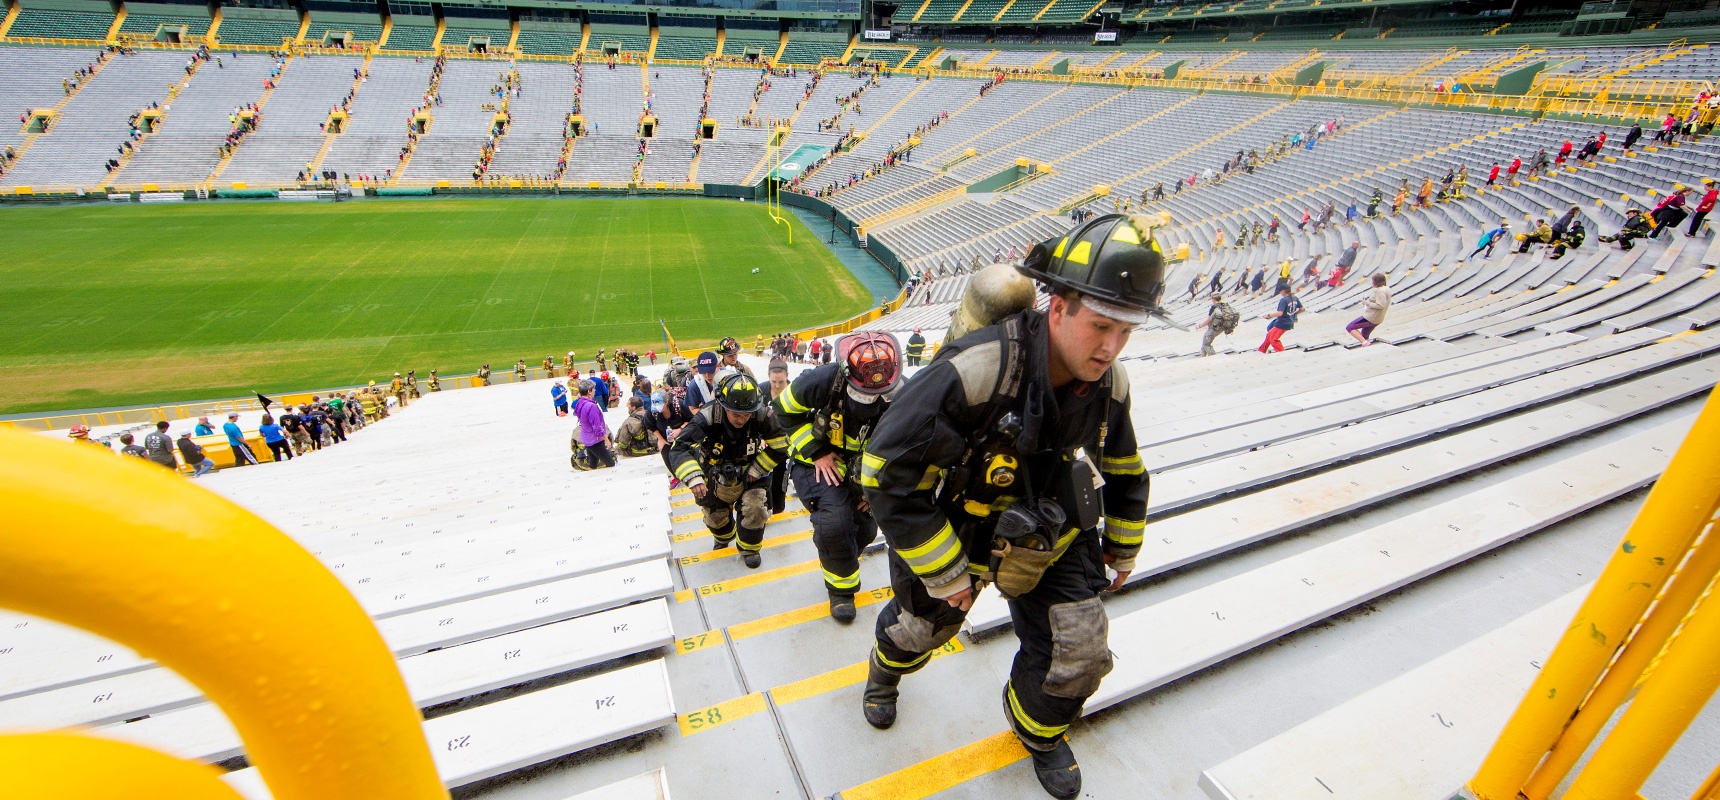 Area-Communities-Come-Together-and-Pay-Tribute-to-Fallen-Firefighters-at-Nations-Largest-9-11-Memorial-Stair-Climb_Header.jpg